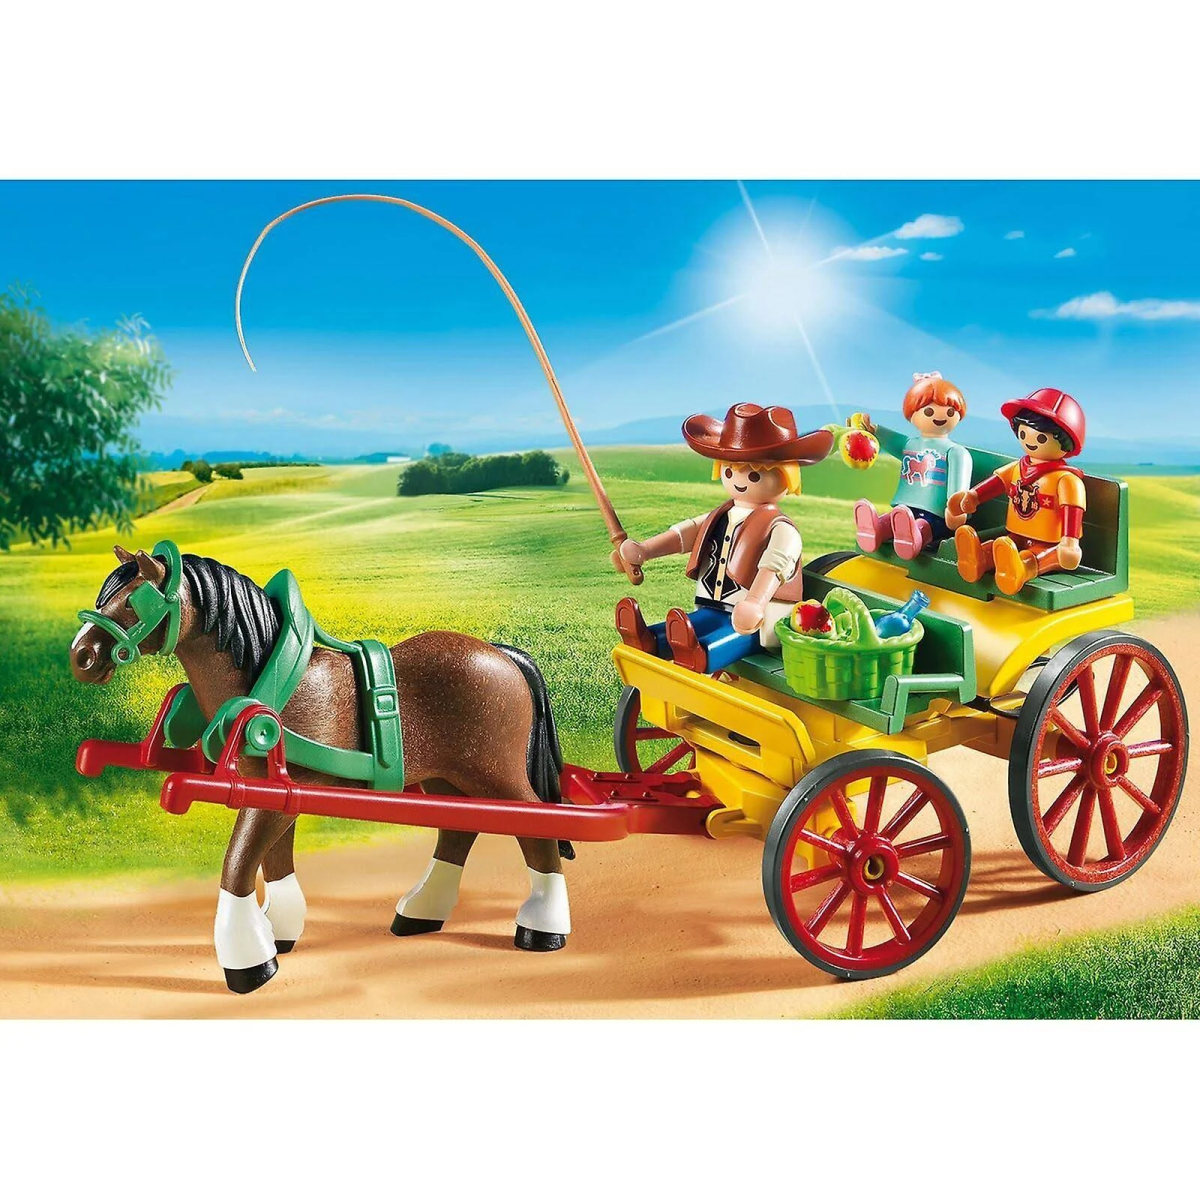 PLAYMOBIL 6932 Spielzeugsets